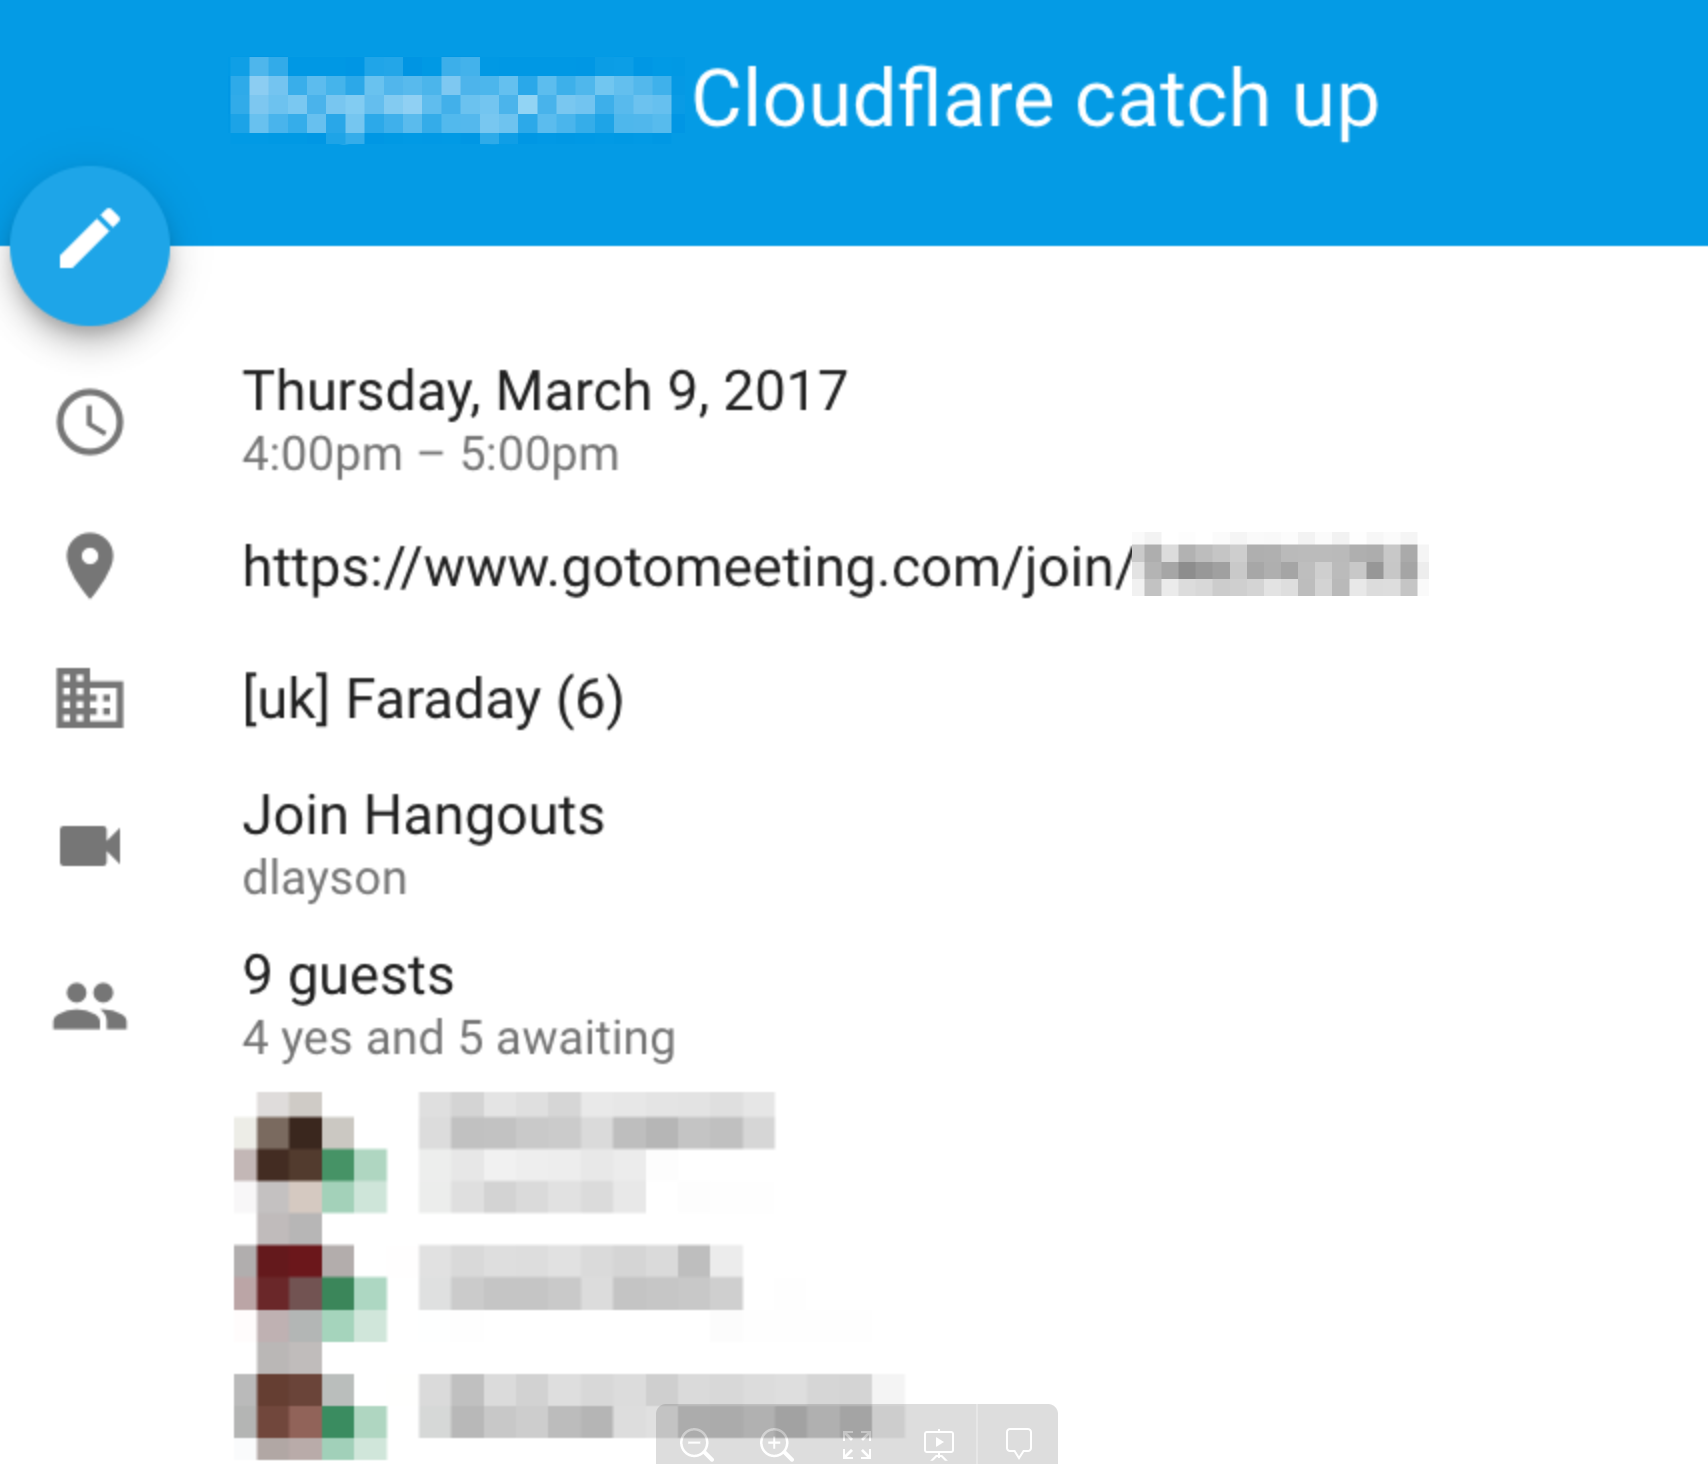 1_year_and_3_months_working_at_Cloudflare__How_is_it_going_so_far__-Sales-_Cloudflare_Wiki-1